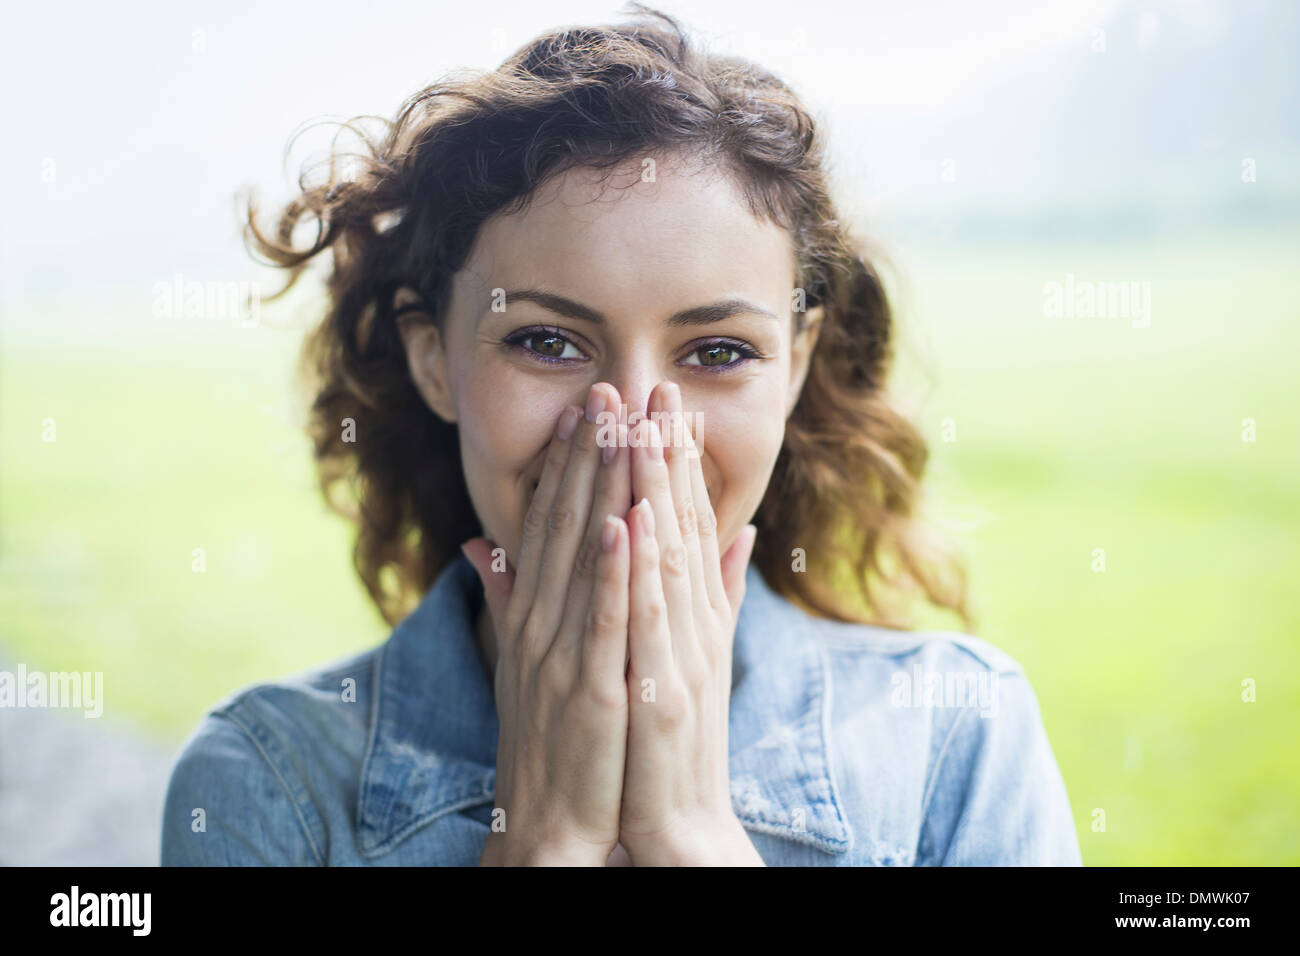 A young woman in a rural landscape with windblown curly hair. Covering her face with her hands and laughing. Stock Photo